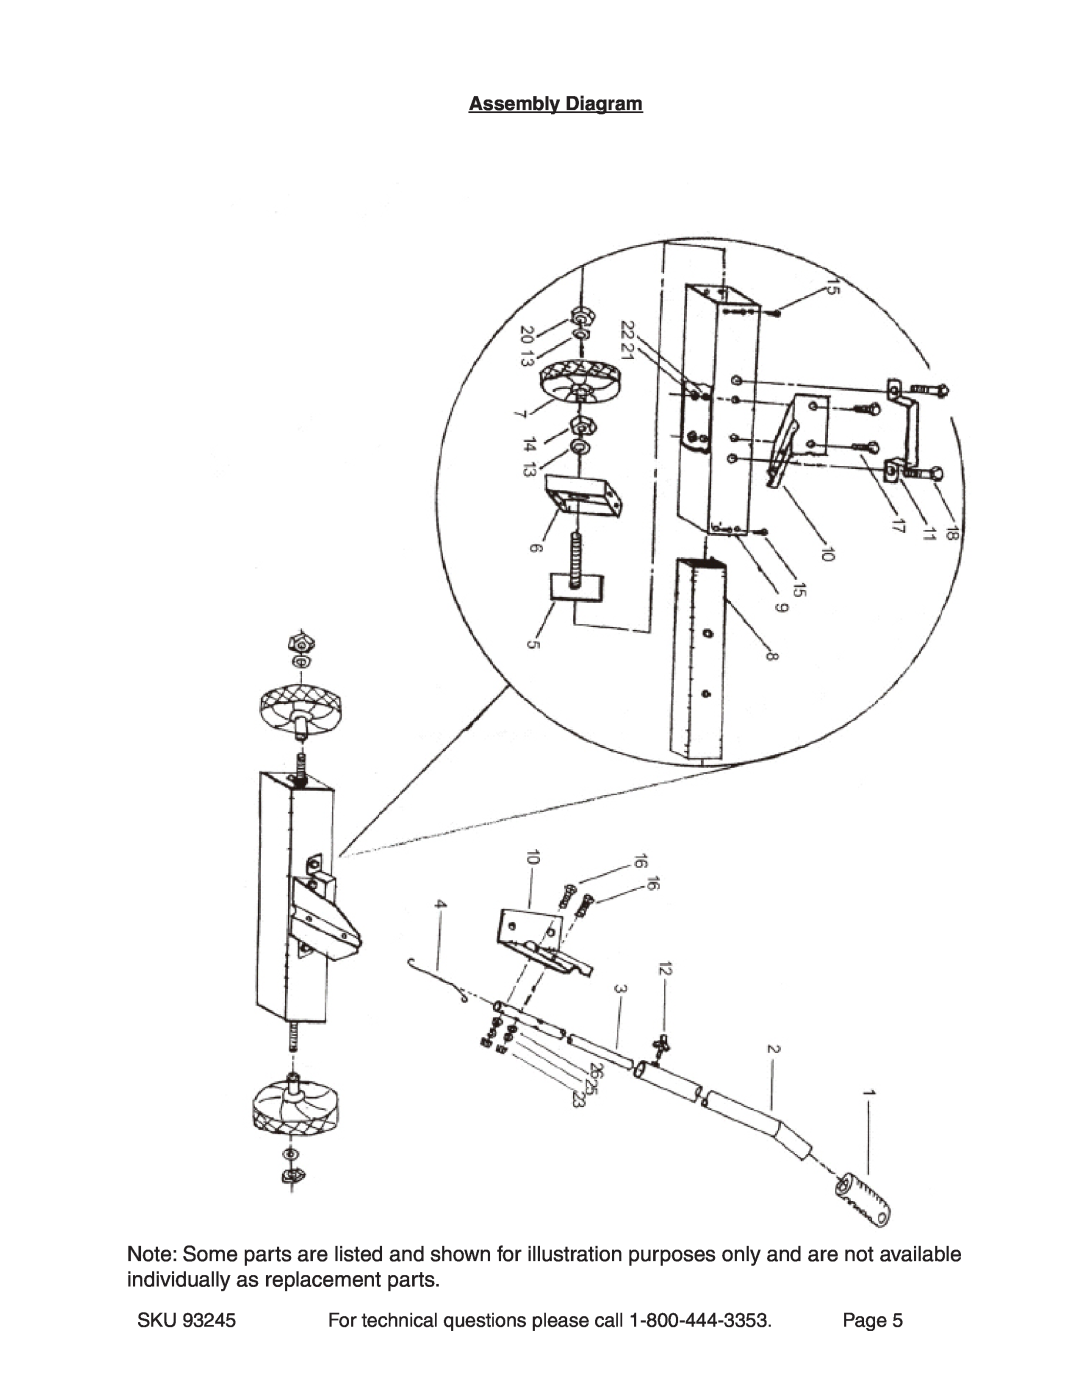 Harbor Freight Tools 93245 manual Assembly Diagram, Page 